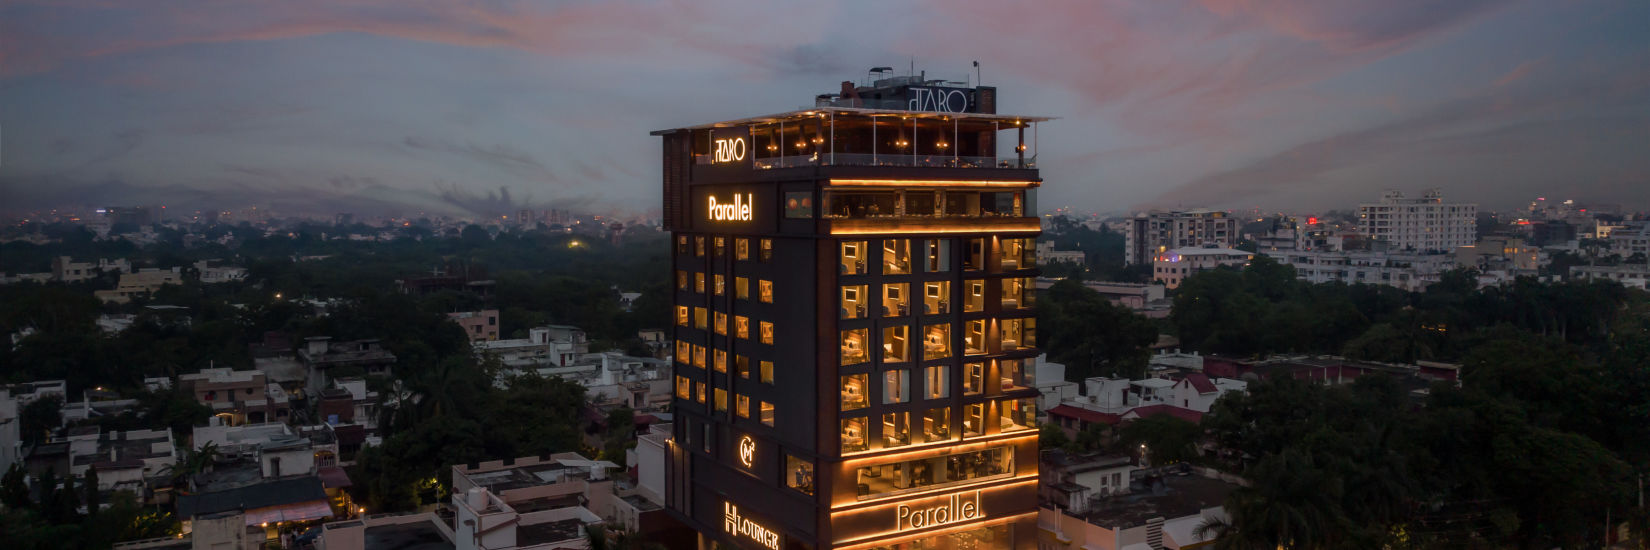 Facade of Parallel Hotel in Udaipur in the evening time